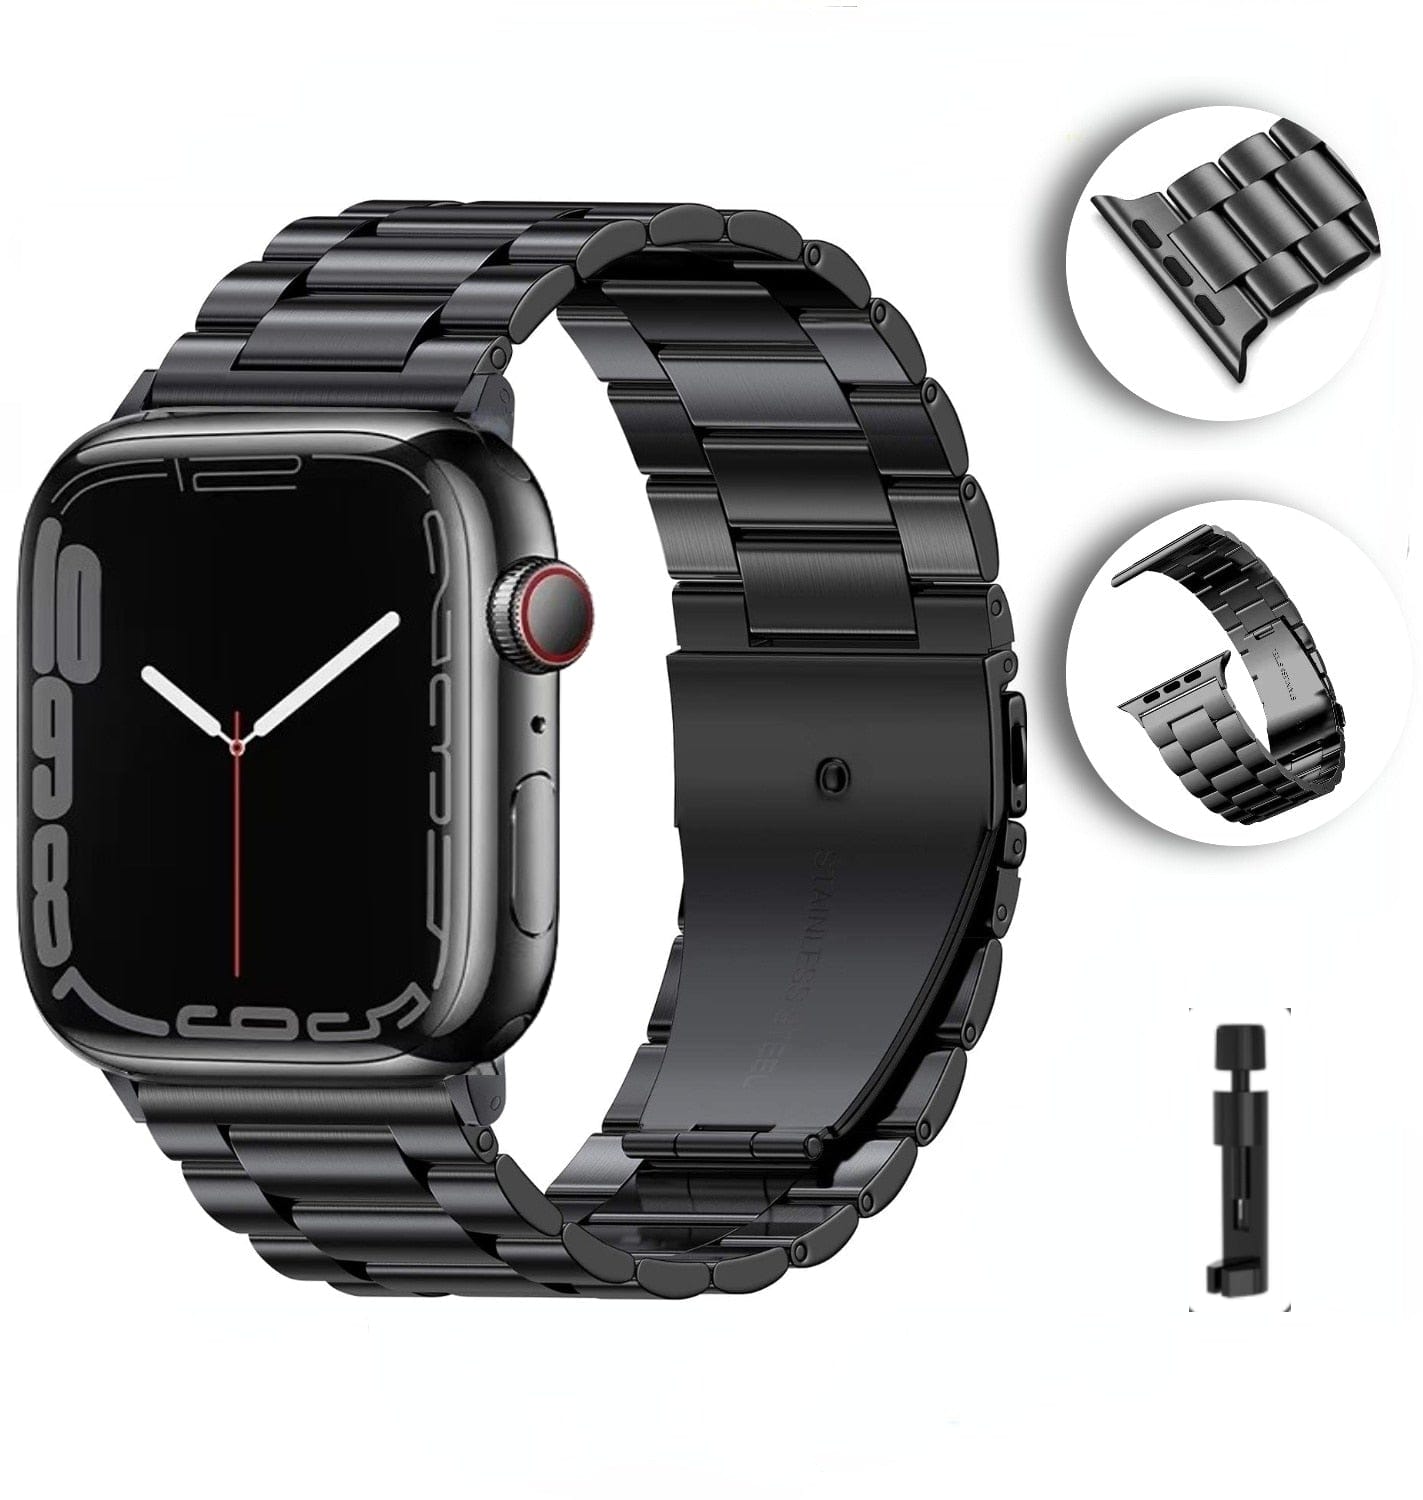 VVS Jewelry hip hop jewelry Black/Silver Metal Apple Watch Band with Folding Buckle